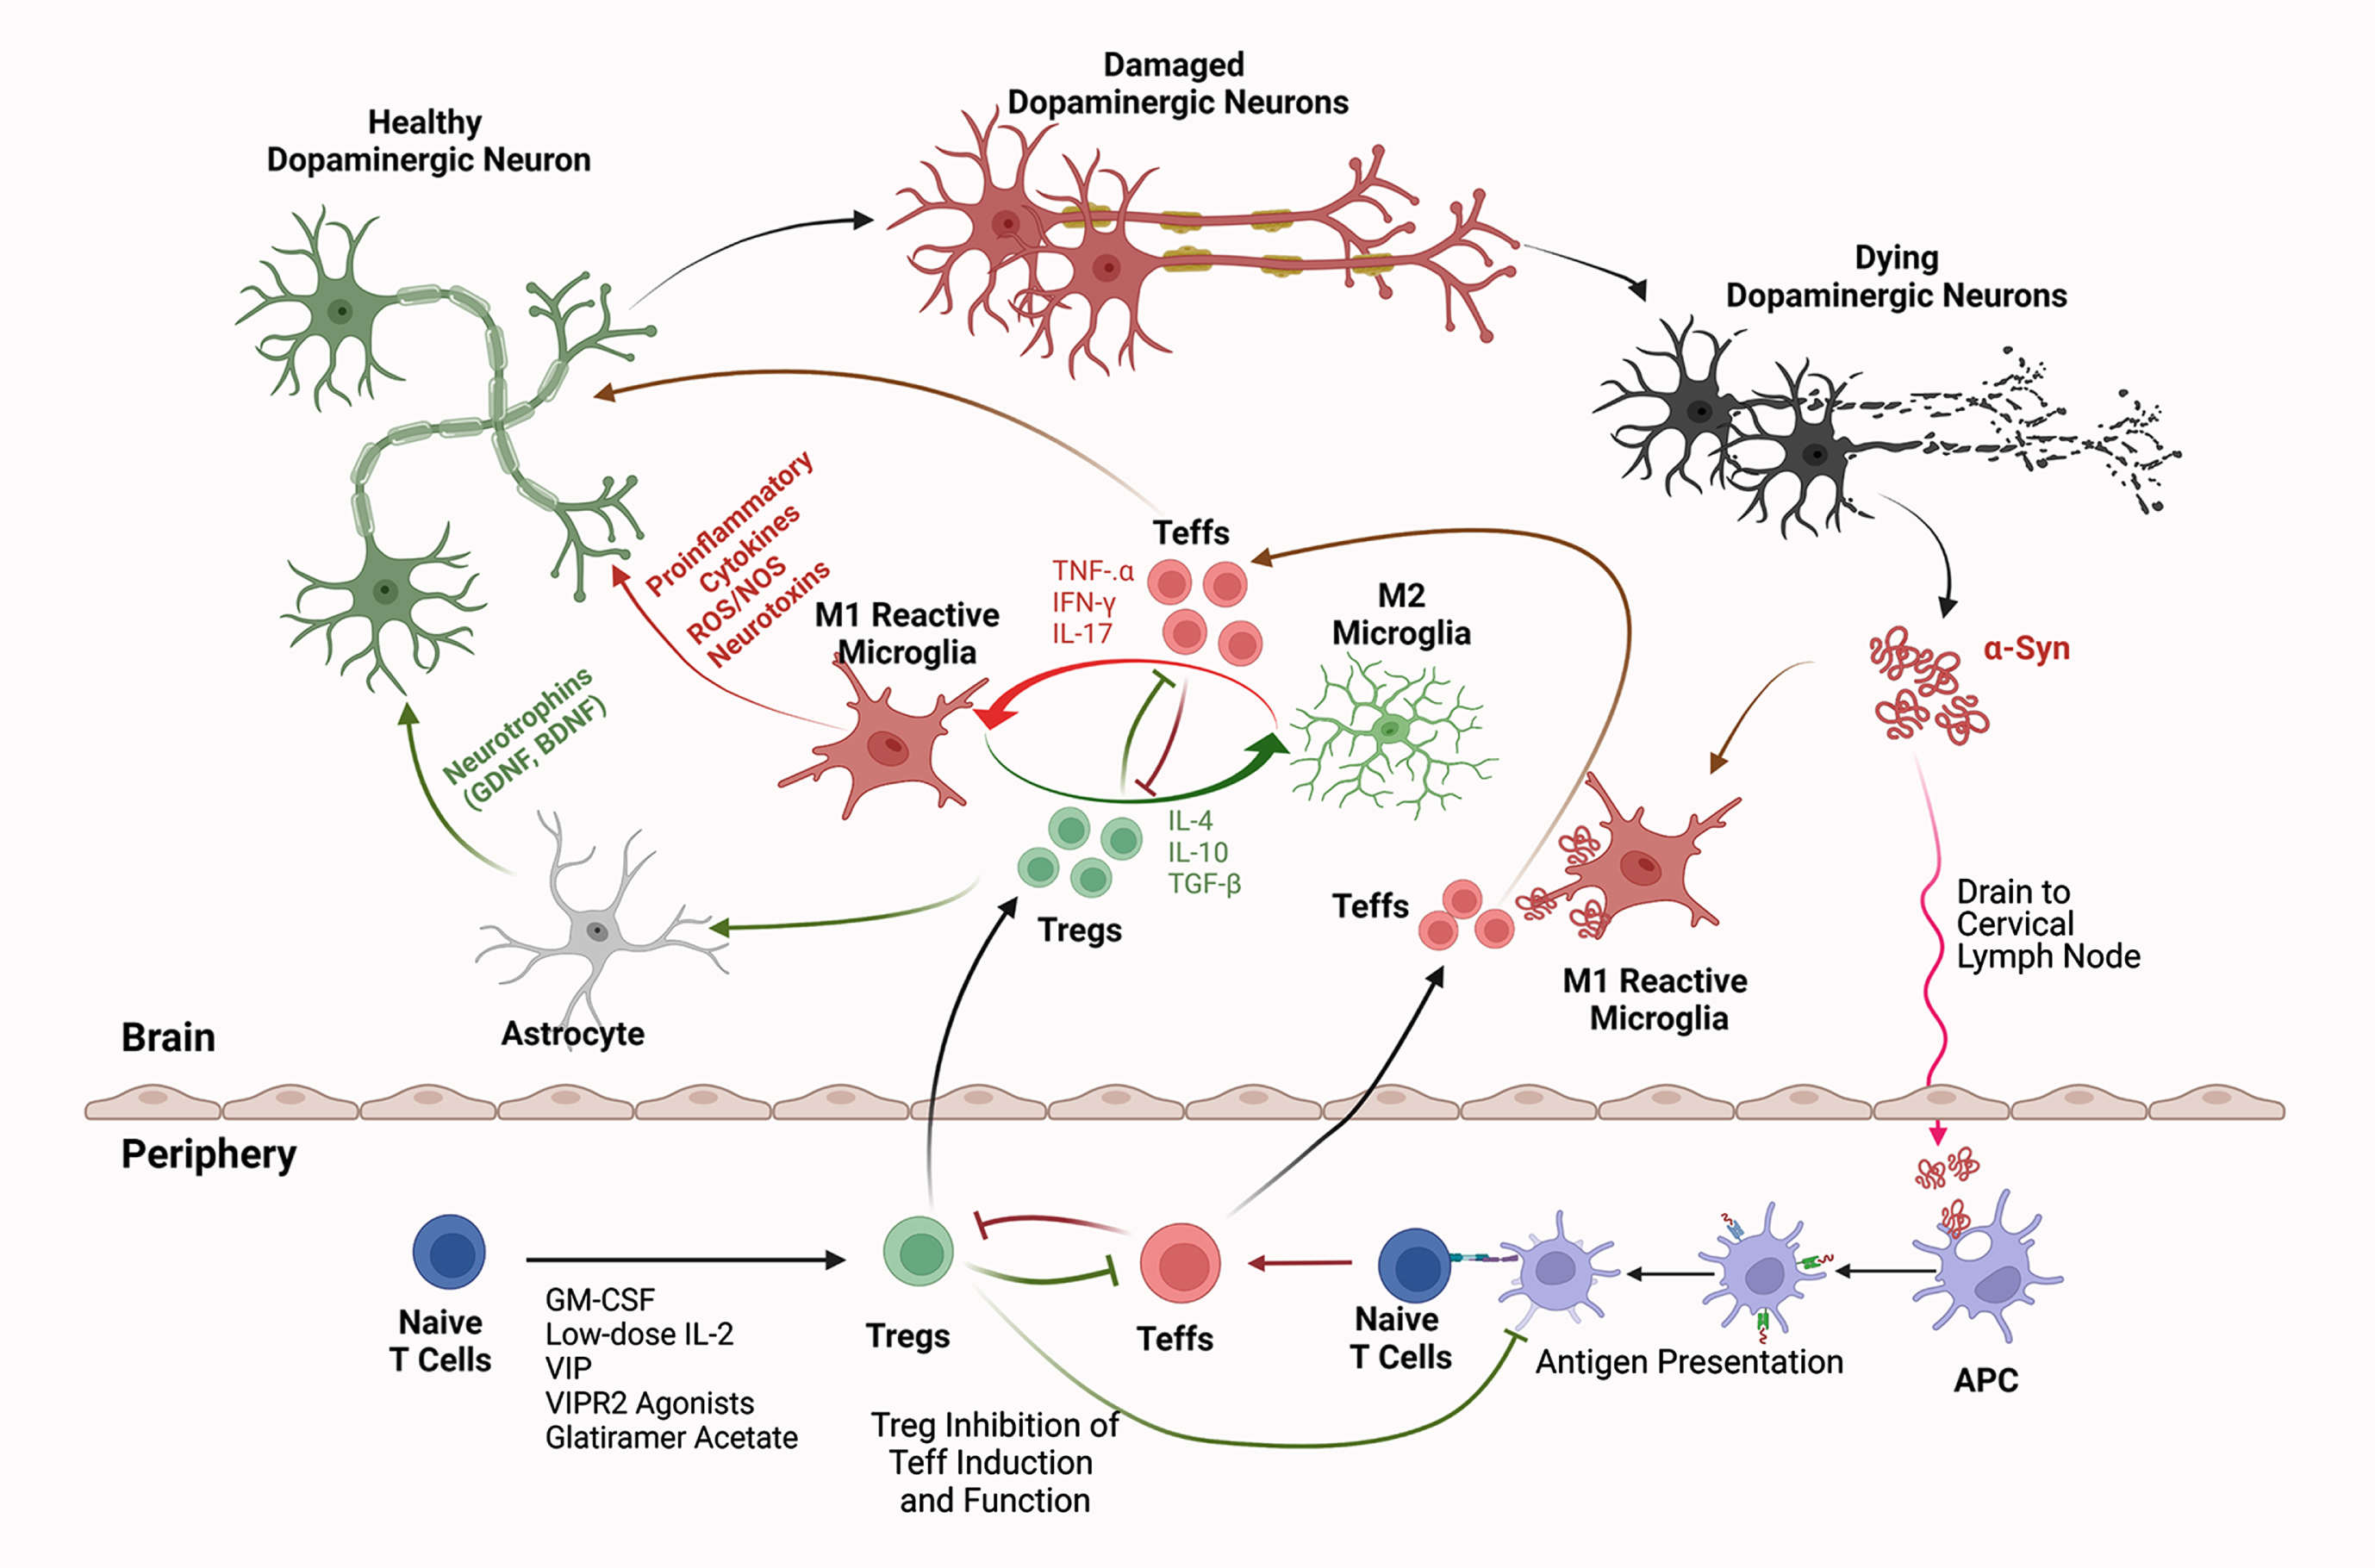 Interactions of Innate and Adaptive Immunity in Parkinson’s Disease. Intraneuronal aberrantly folded α-syn is liberated from injured or dying dopaminergic neurons. Consequent microglial activation leads to a secretory neurotoxic pro-inflammatory cascade within the substantia nigra pars compacta. Misfolded and modified α-syn drains into secondary lymphoid tissues where the adaptive immune system is engaged. This occurs, in measure, by antigen-presenting dendritic cells (APCs) which present modified self-antigens that include nitrated-α-syn, to naïve T cells and elicit Teffs such as Th1, Th2, and Th17 Teffs. Numbers of polarized Teffs increase by clonal expansion. In areas of focal inflammation in the brain, chemokine gradients form and promote endothelial cell to upregulate adhesion and selectin molecules that are recognized by cognate integrin molecules upregulated by expanded and circulating Teffs. Teffs cross the BBB and are reactivated by microglia, which further exacerbate neuroinflammation and neurodegeneration through secretion of TNF-α, IFN-γ, and IL-17. In contrast, Treg-mediated immunosuppressive therapies increase Treg numbers or function with production of anti-inflammatory or immunosuppressive factors, such as IL-10, IL-4, and TGF-β. This promotes a neurotrophic environment by suppressing Teff activation, proliferation, secretion of neurotoxic mediators, and brain infiltration. Additionally, Tregs that cross the BBB suppress microglial and APC activation, attenuate inflammation, block Teff reactivation and cytokine secretion, induce astrocytic neurotrophins, and protect or rescue dopaminergic neurons from further damage. Thus, therapies that induce and/or expand Treg number or function can transform neurotoxic and neurodegenerative conditions into more neurotrophic microenvironments. Created with BioRender.